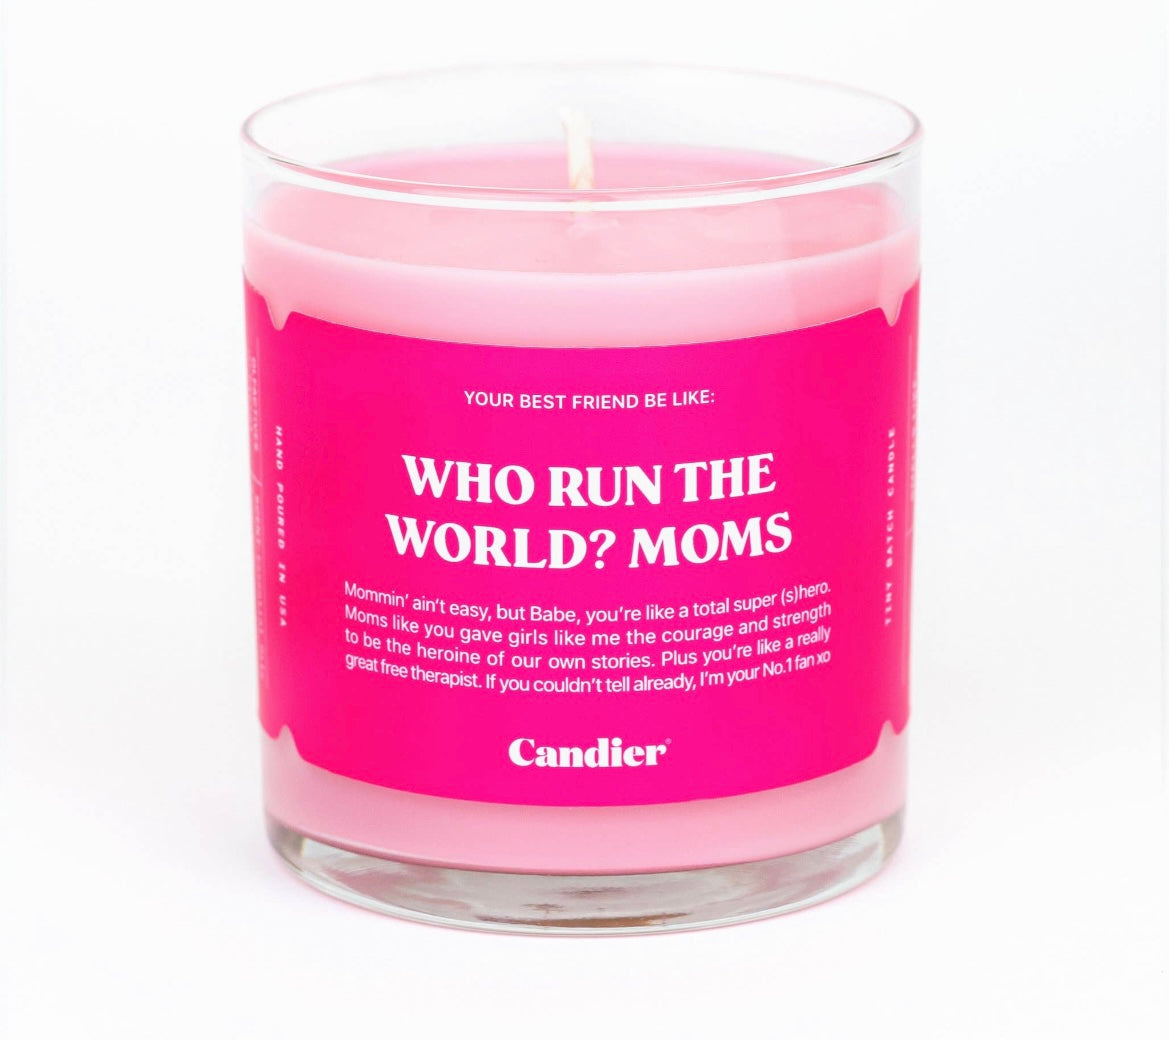 Who runs the world? Moms Candle